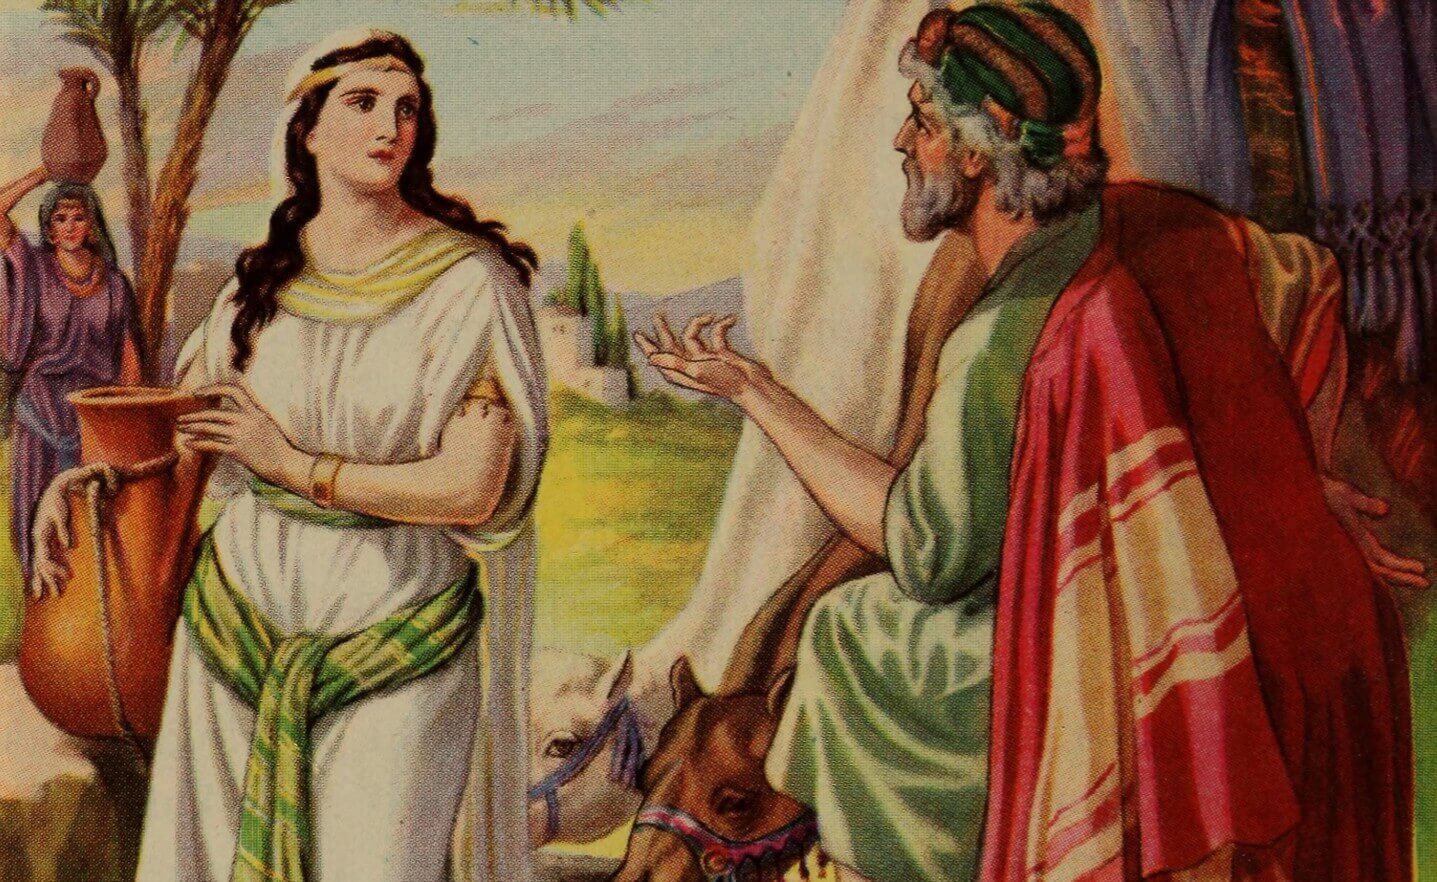 Netivyah | Chayei Sarah | Illustration of Eliezer and Rebecca from an illustrated bible from 1991, by Adolf Hult (1869-1943)